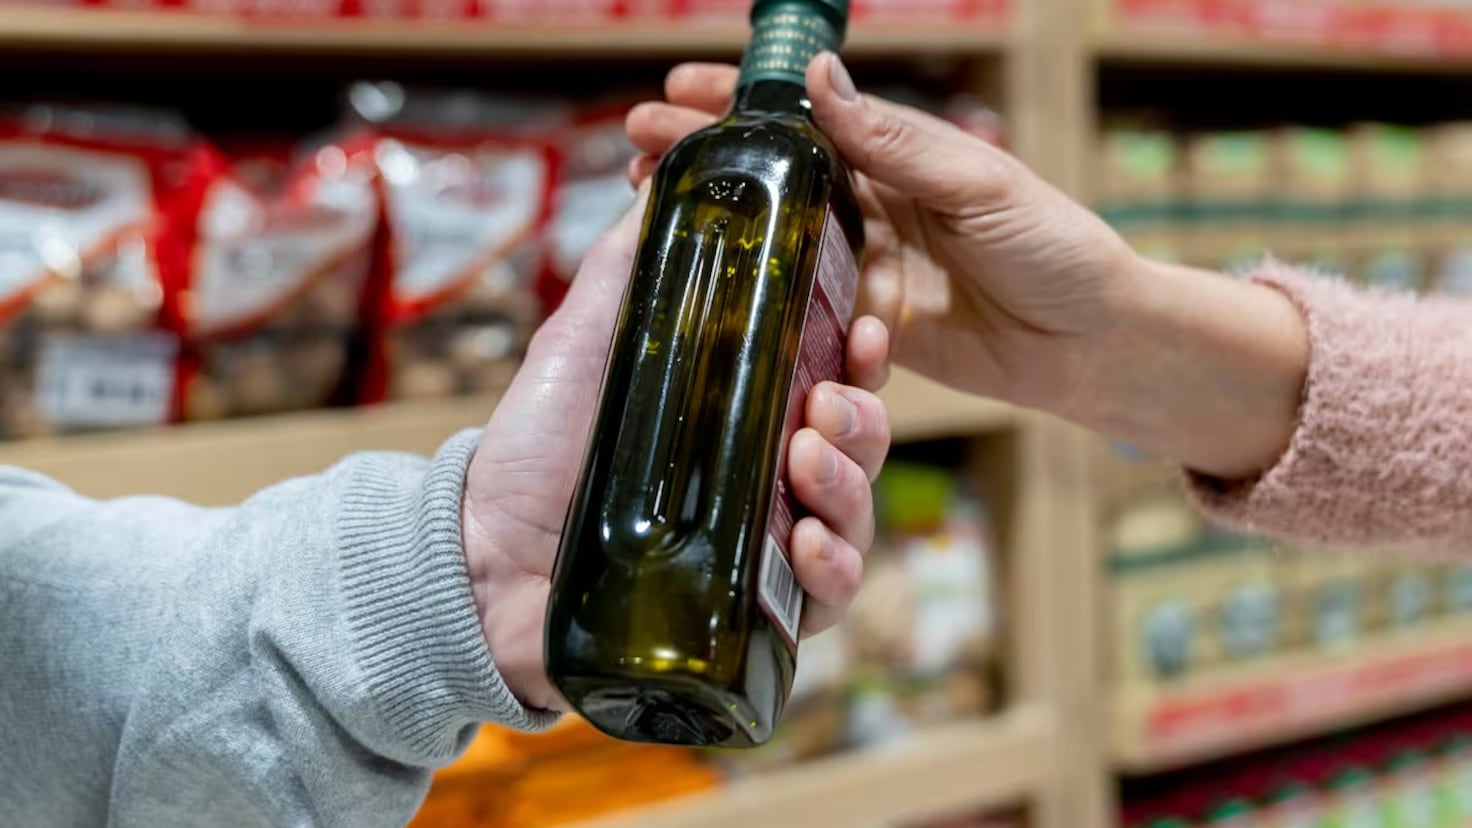 The change in the price of olive oil
